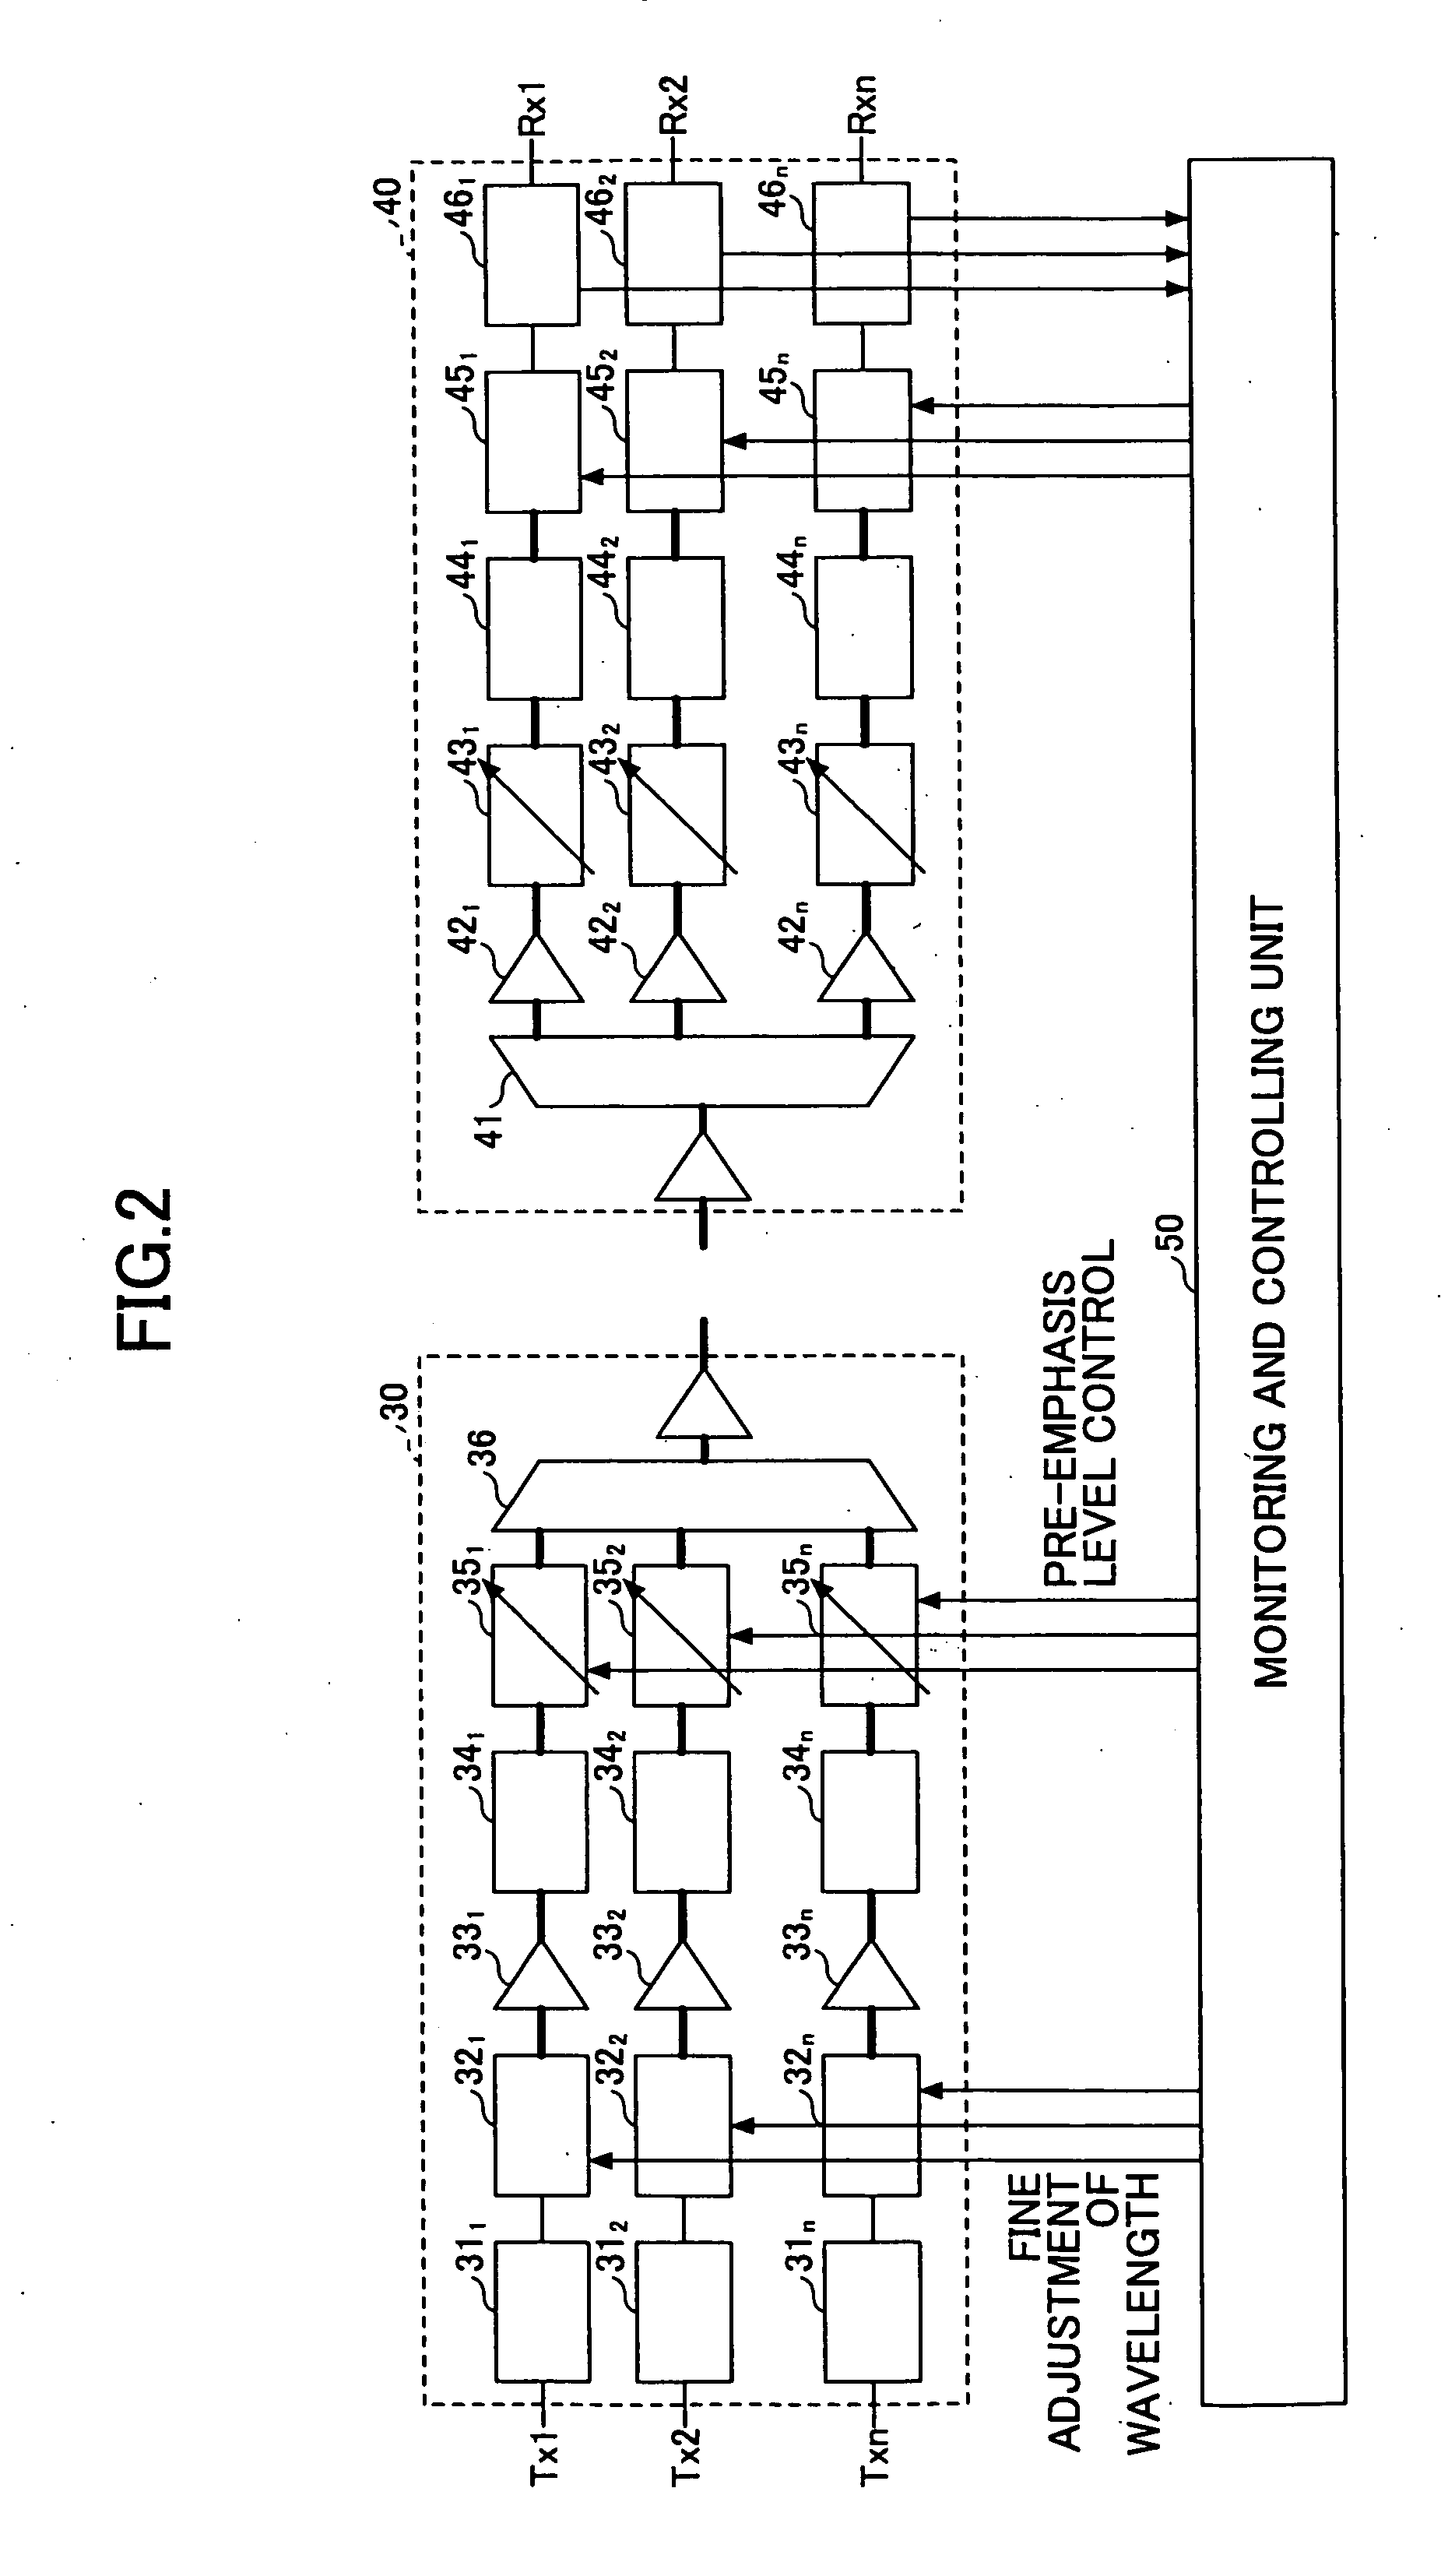 Optical wavelength controlling method and a system thereof